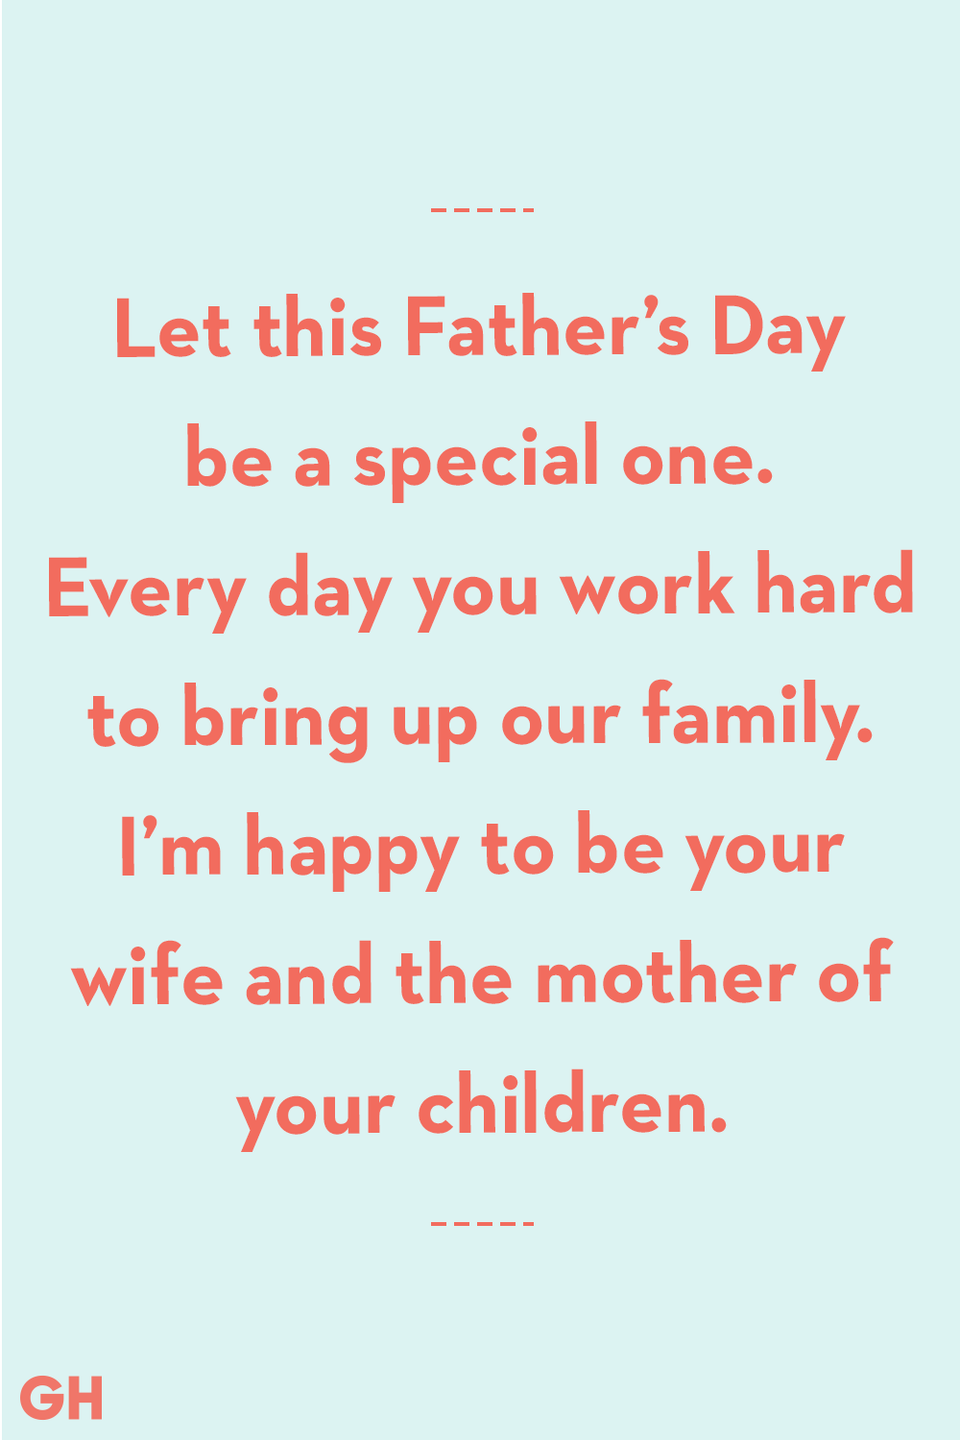 <p>Let this Father’s Day be a special one. Every day you work hard to bring up our family. I’m happy to be your wife and the mother of your children.</p>